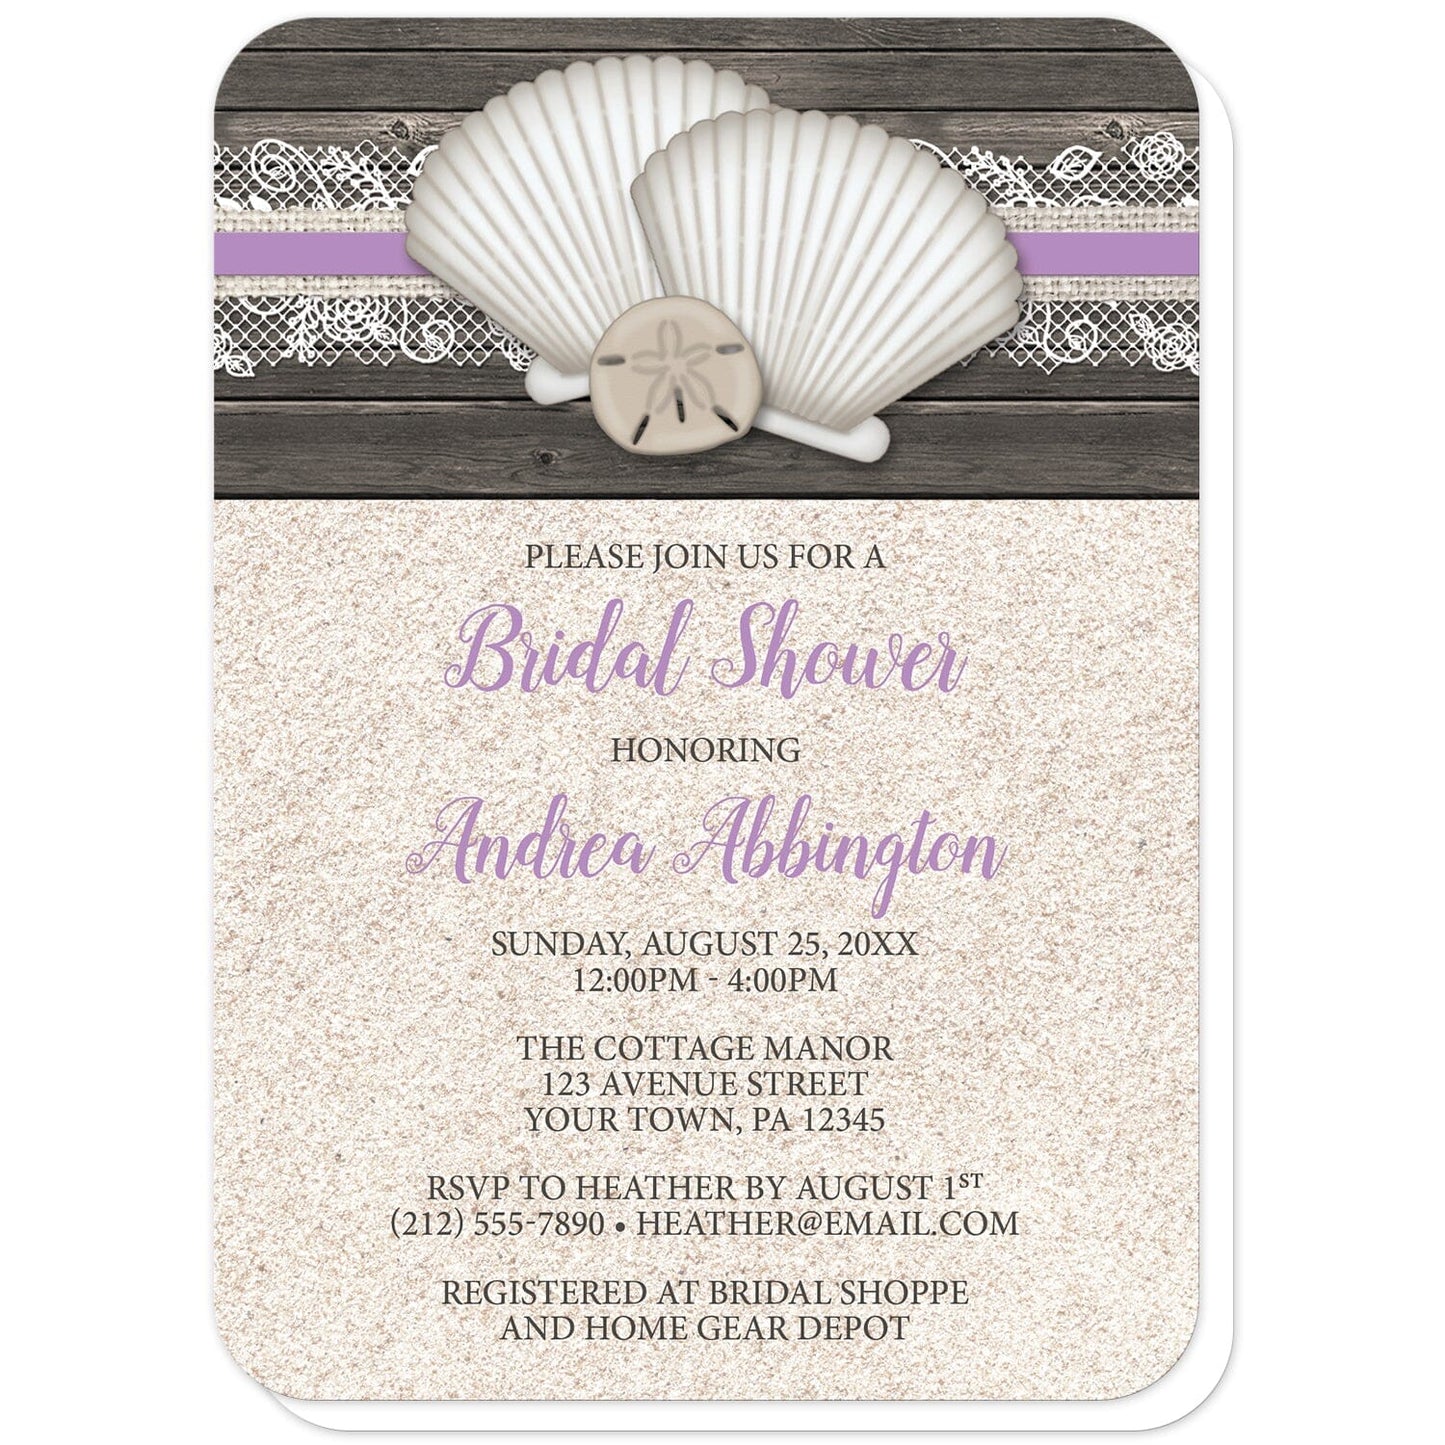 Seashell Lace Wood and Sand Purple Beach Bridal Shower Invitations (with rounded corners) at Artistically Invited. Rustic seashell lace wood and sand purple beach bridal shower invitations with two seashells and a sand dollar on a purple, burlap and lace ribbon over a dark brown wood pattern along the top. Your personalized bridal shower celebration details are custom printed in dark brown and purple over a beige sand background design below the seashells.